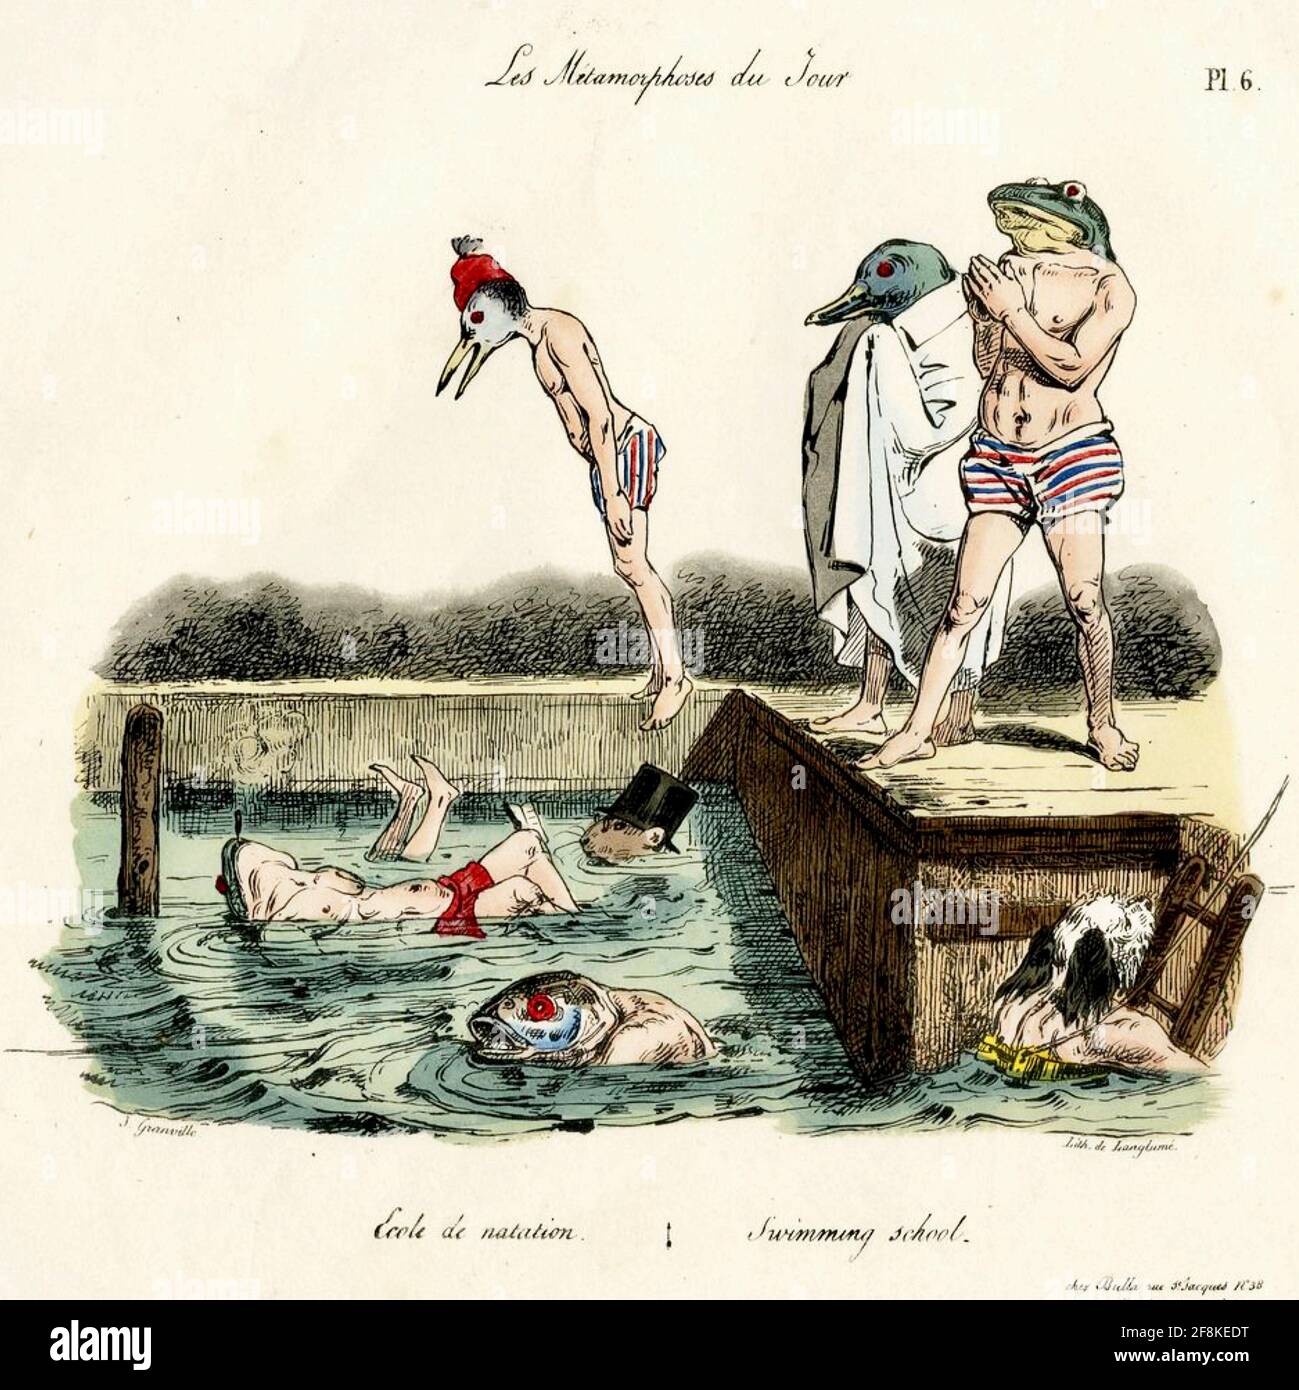 Satire showing a group of animal-headed men diving and swimming in a pool by J. J. Grandville from 1829 Stock Photo